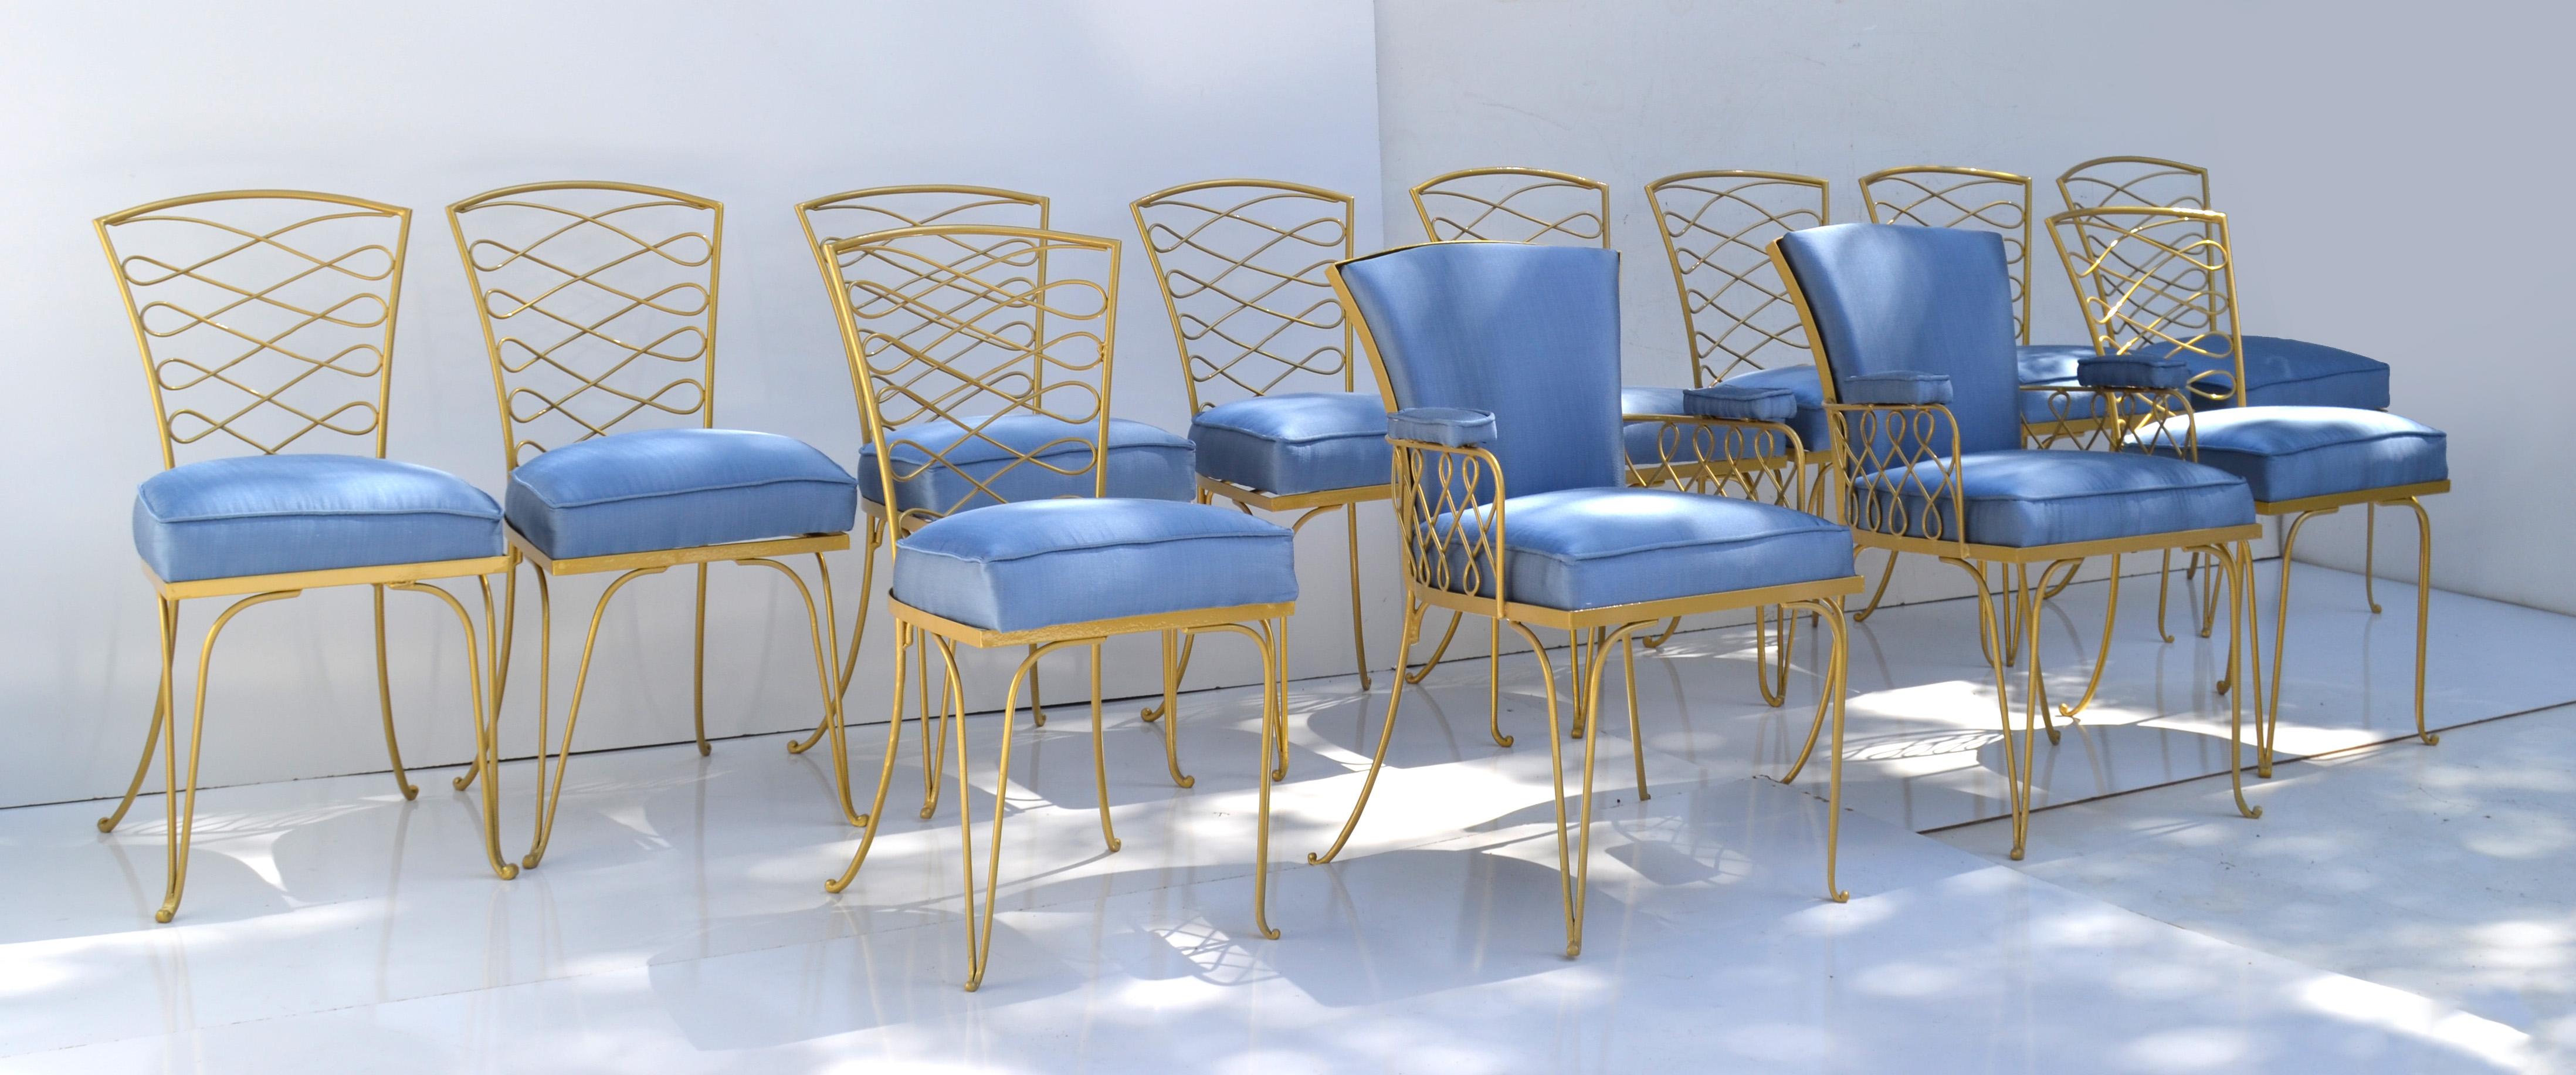 French Set of 14 René Prou Art Deco Gold Wrought Iron Dining Room Chairs Blue Fabric  For Sale